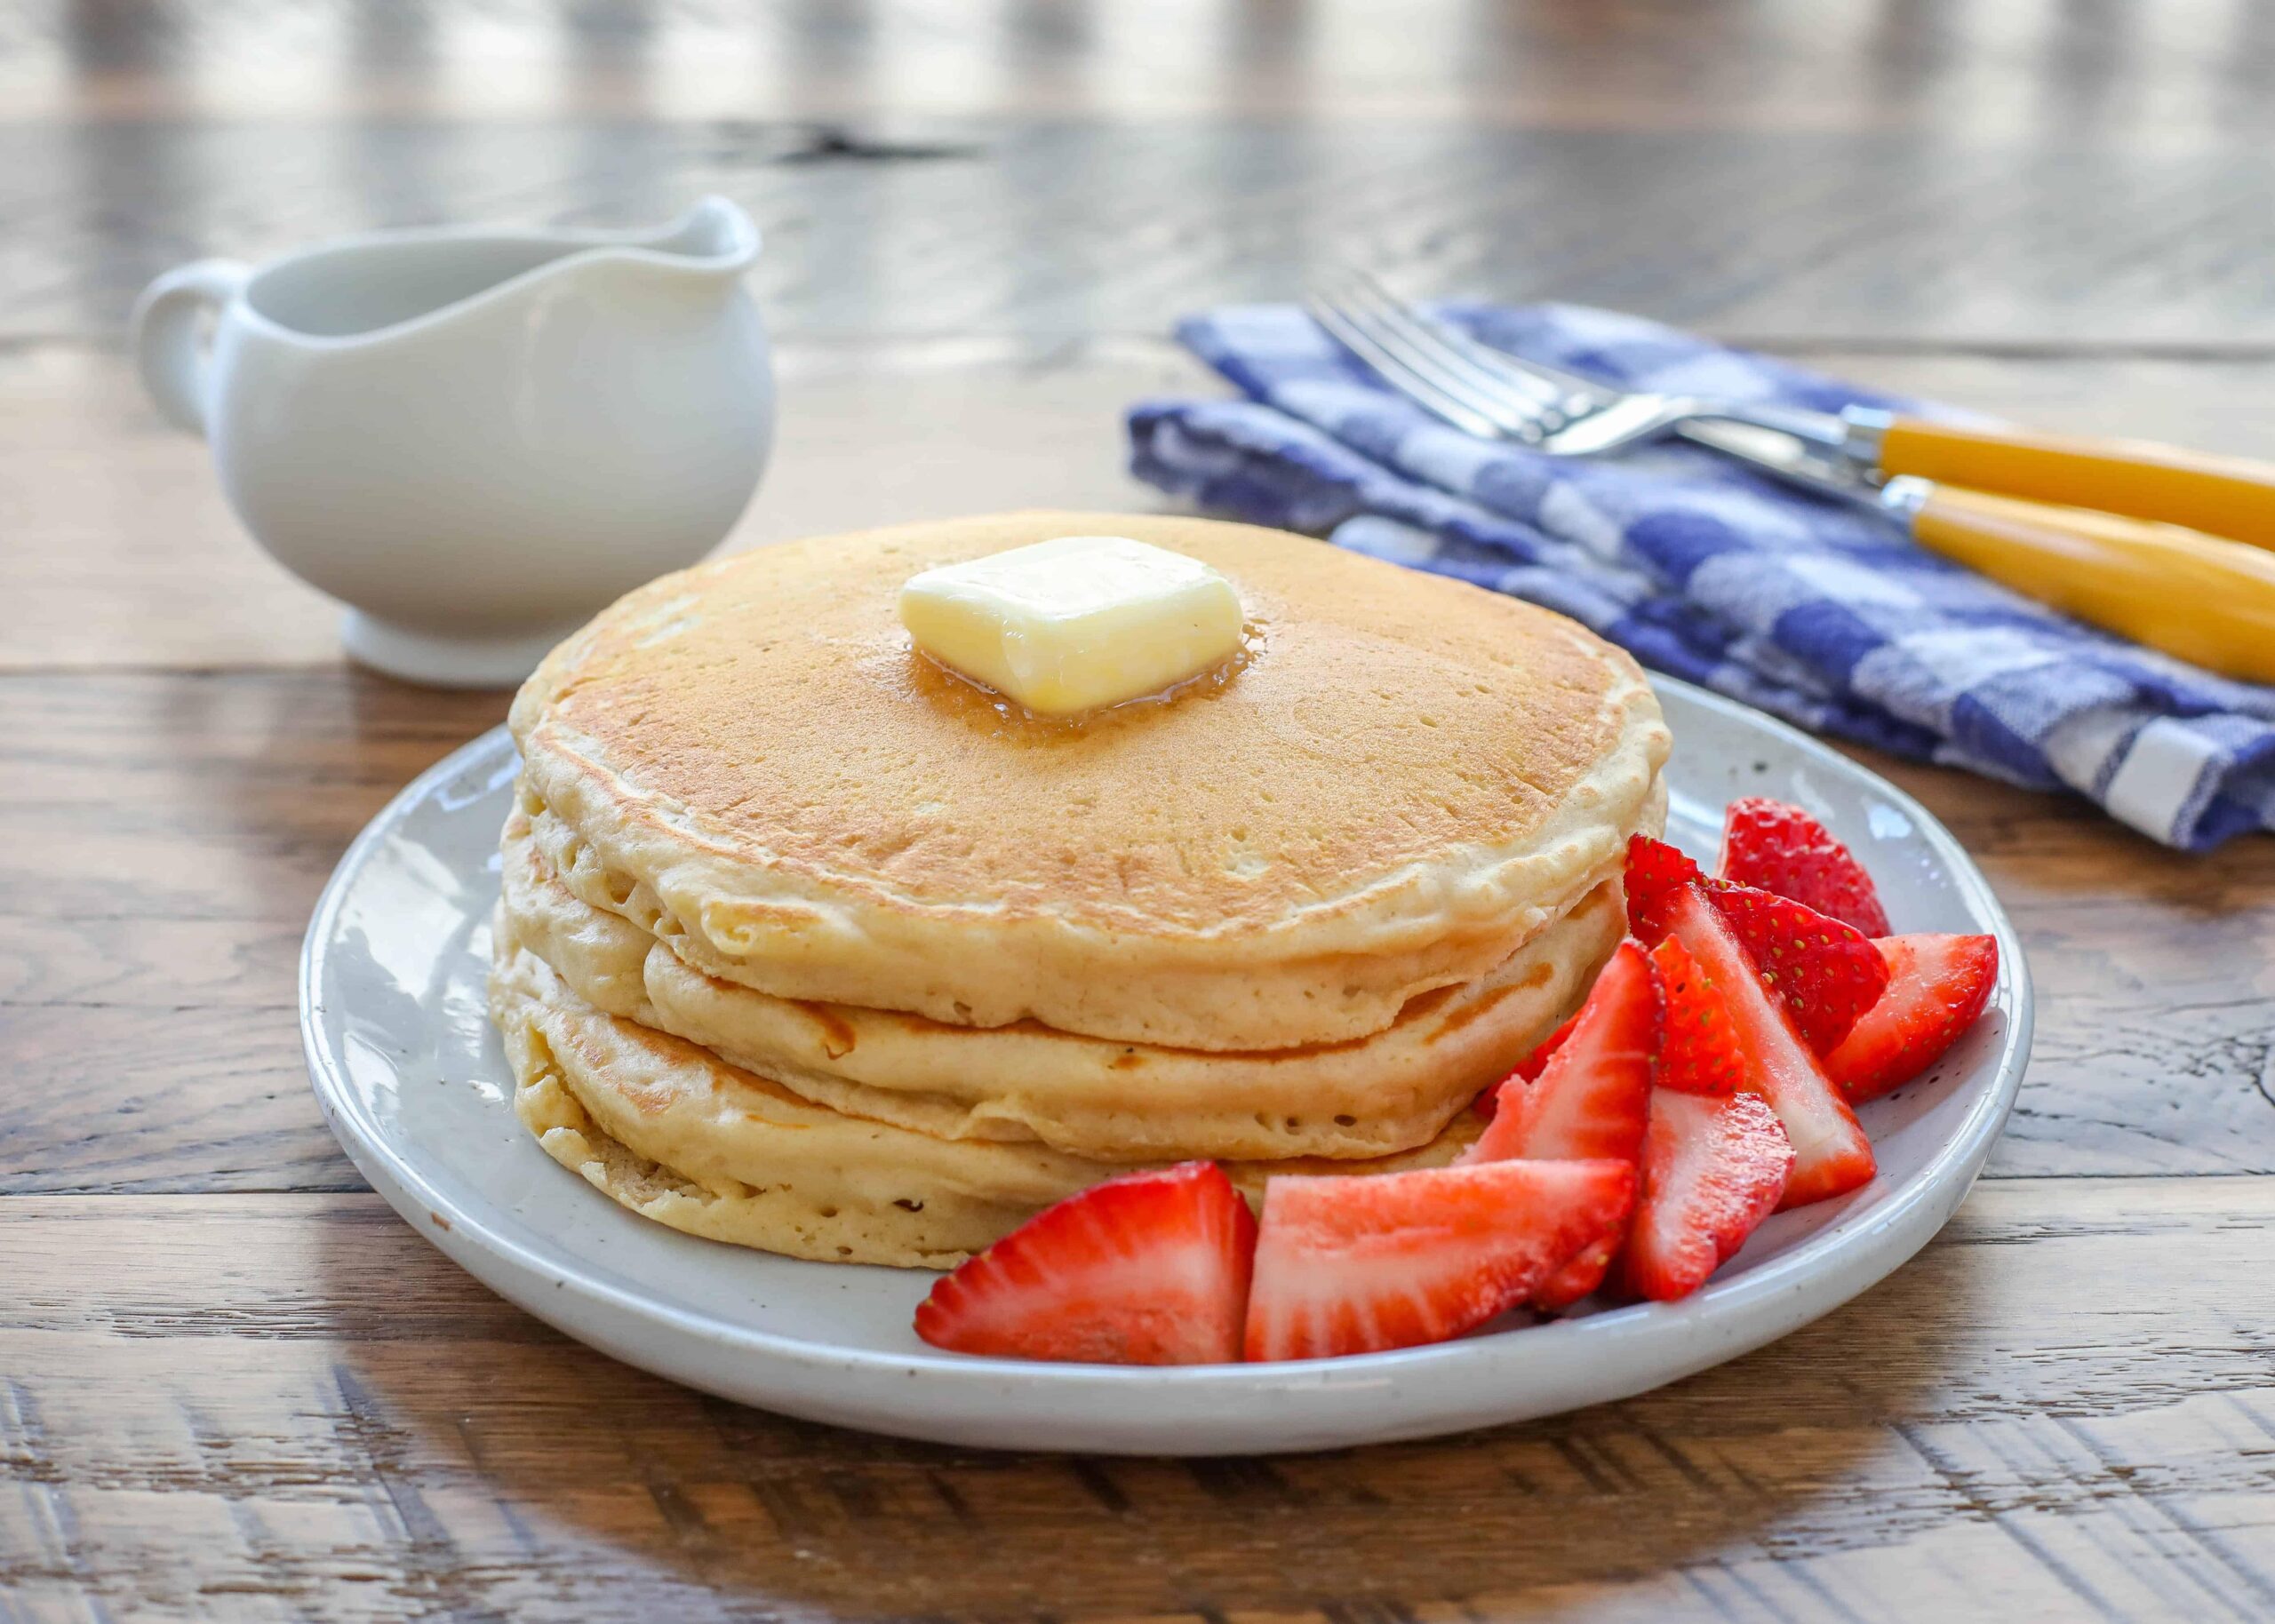  You won't believe how easy it is to make pancakes from scratch!